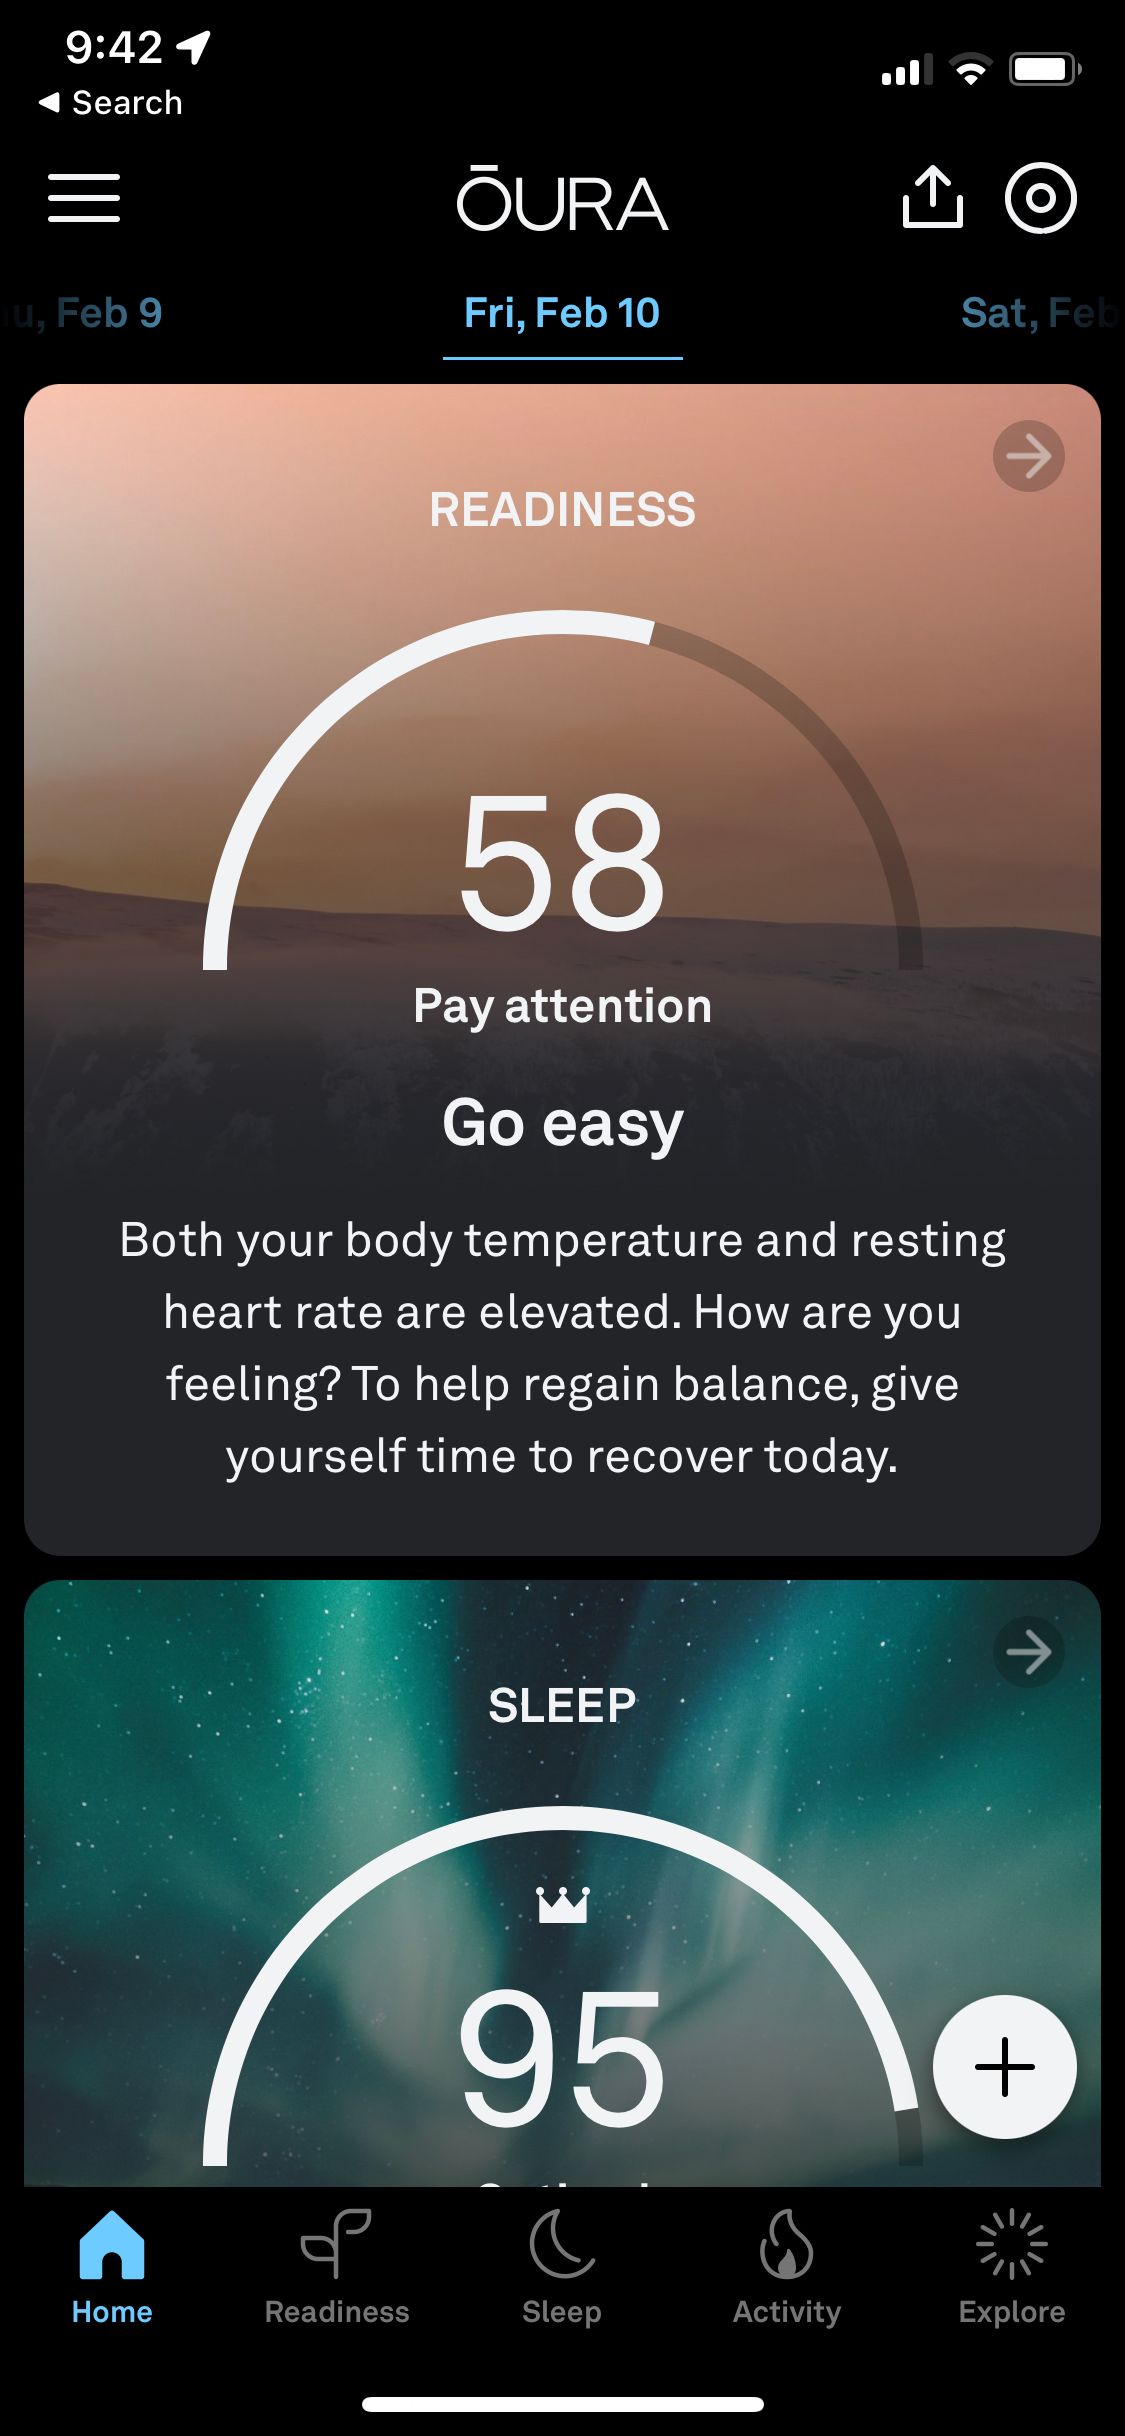 Garbage in, Garbage out: A Look at Misinterpretations from Oura